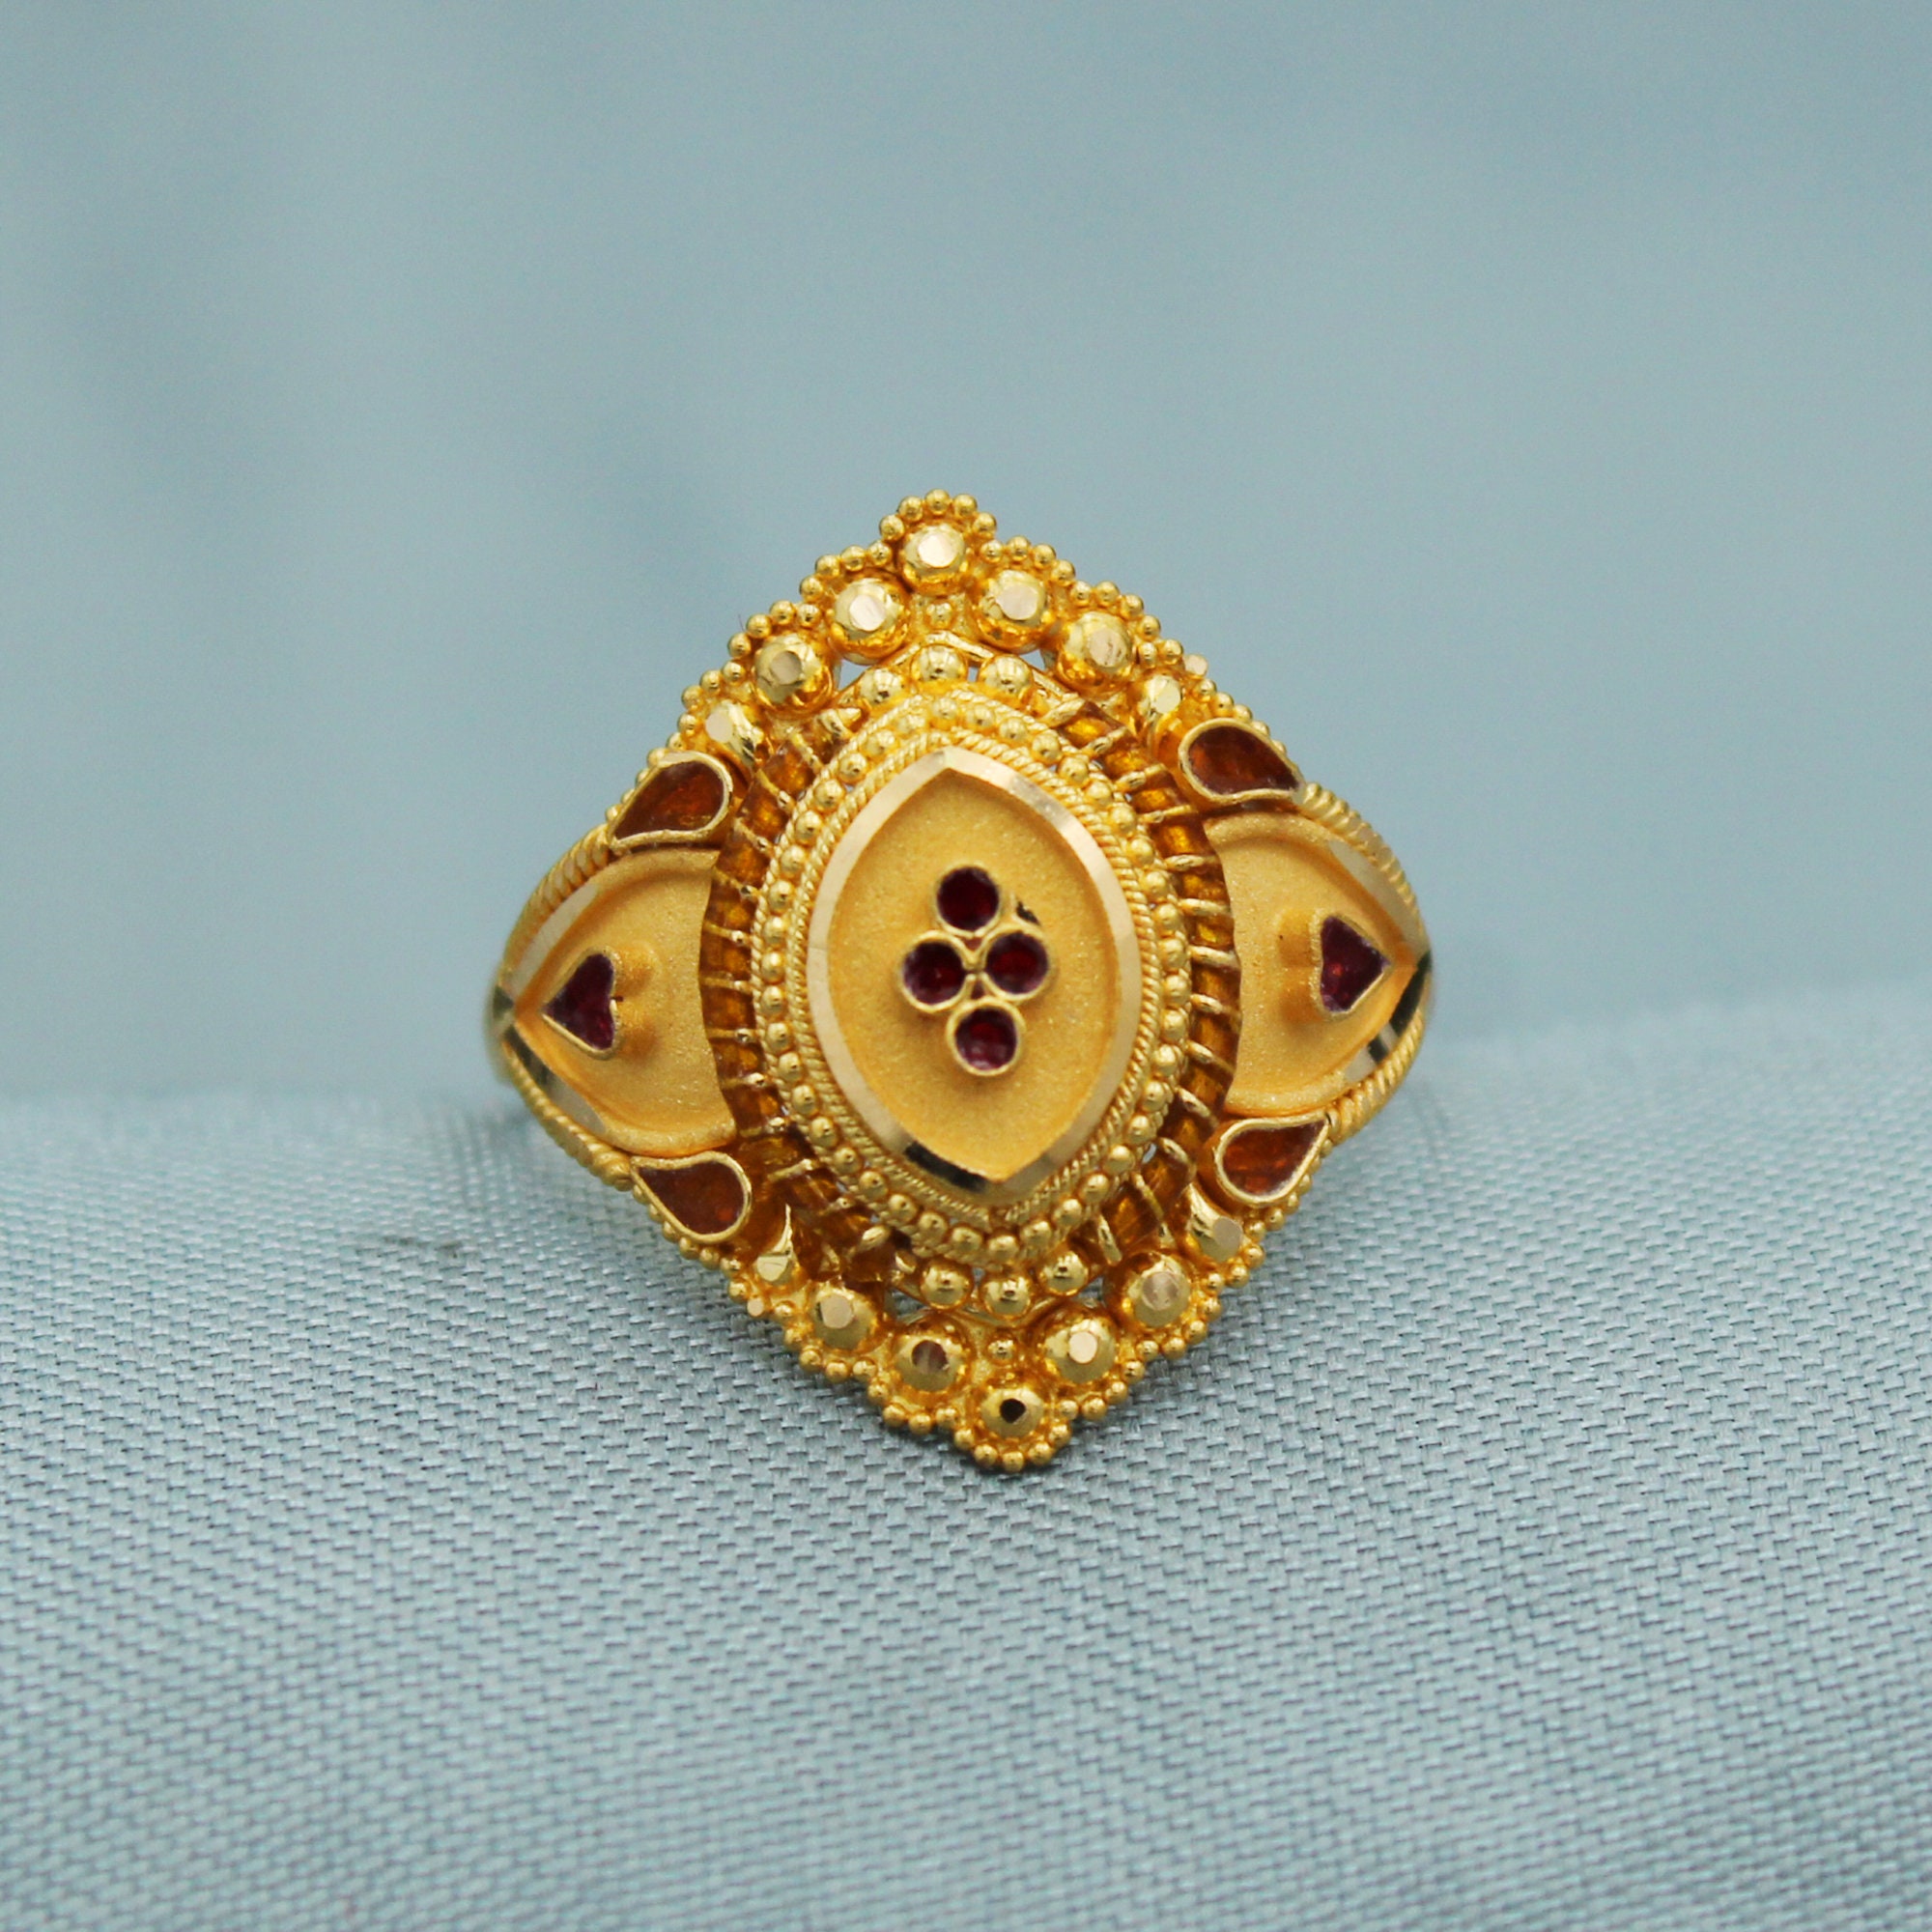 22kt Gold Ring Indian Handmade Antique Vintage Design , 22k Yellow Gold Ring,traditional  Rajasthani , Pure Gold Handmade Wedding Ring - Etsy